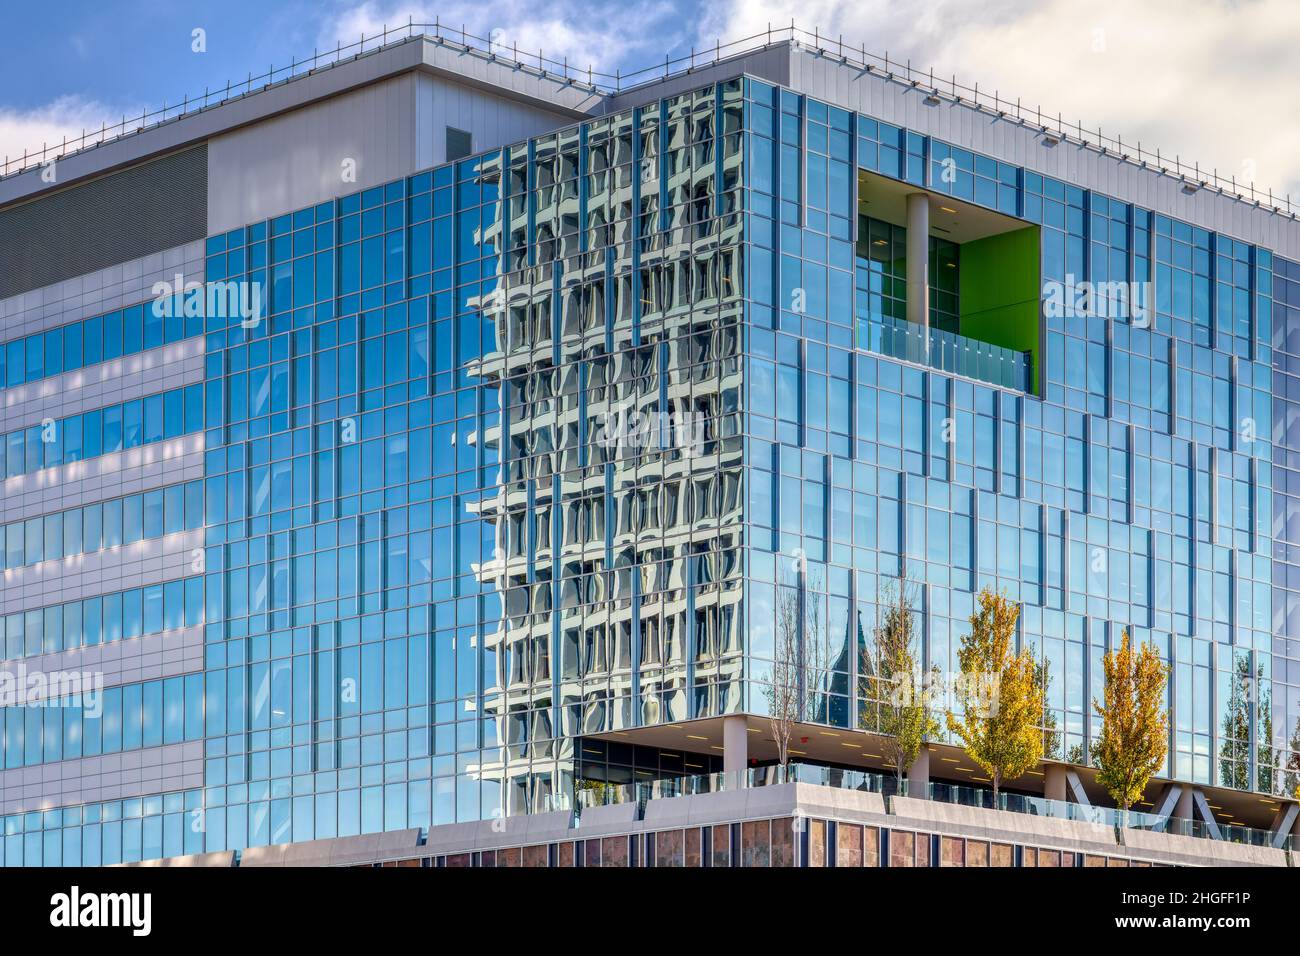 VCU Children’s Pavilion got mixed reviews but the way it reflects and fractures the sky and neighboring buildings is dynamic abstract art. Stock Photo